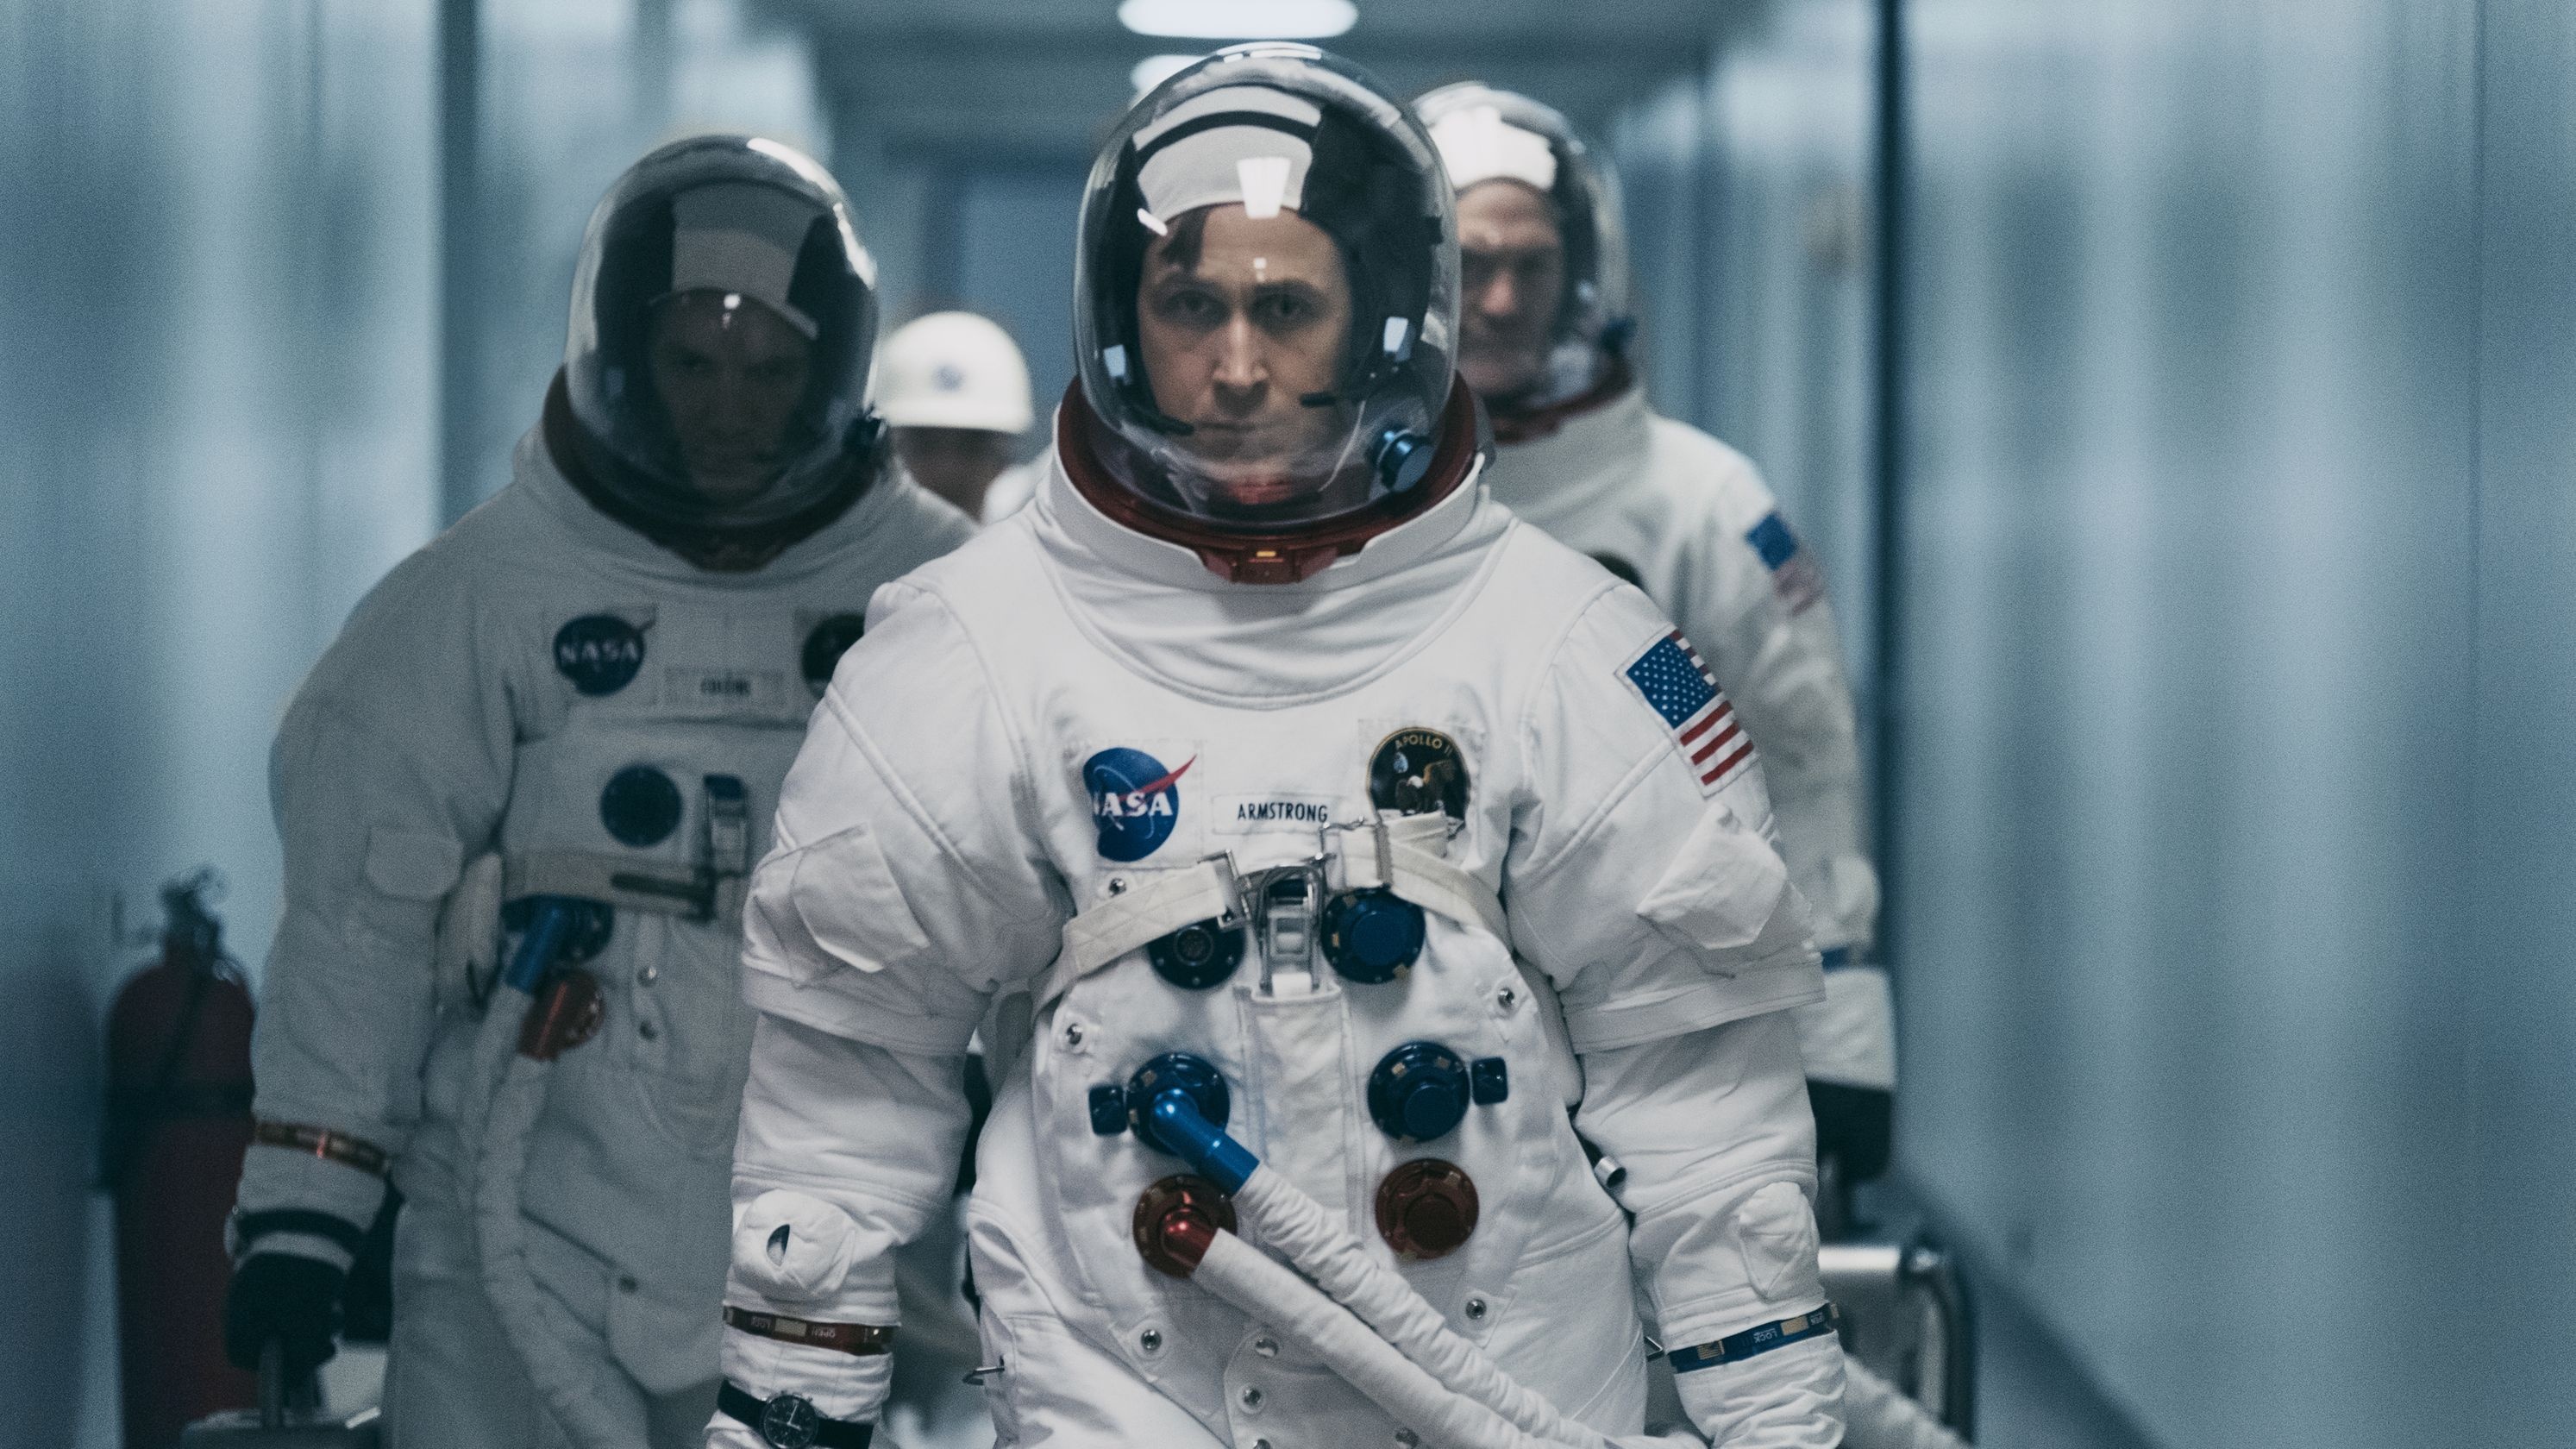 First Man: The story follows the years leading up to the Apollo 11 mission to the Moon in 1969. 2990x1680 HD Wallpaper.